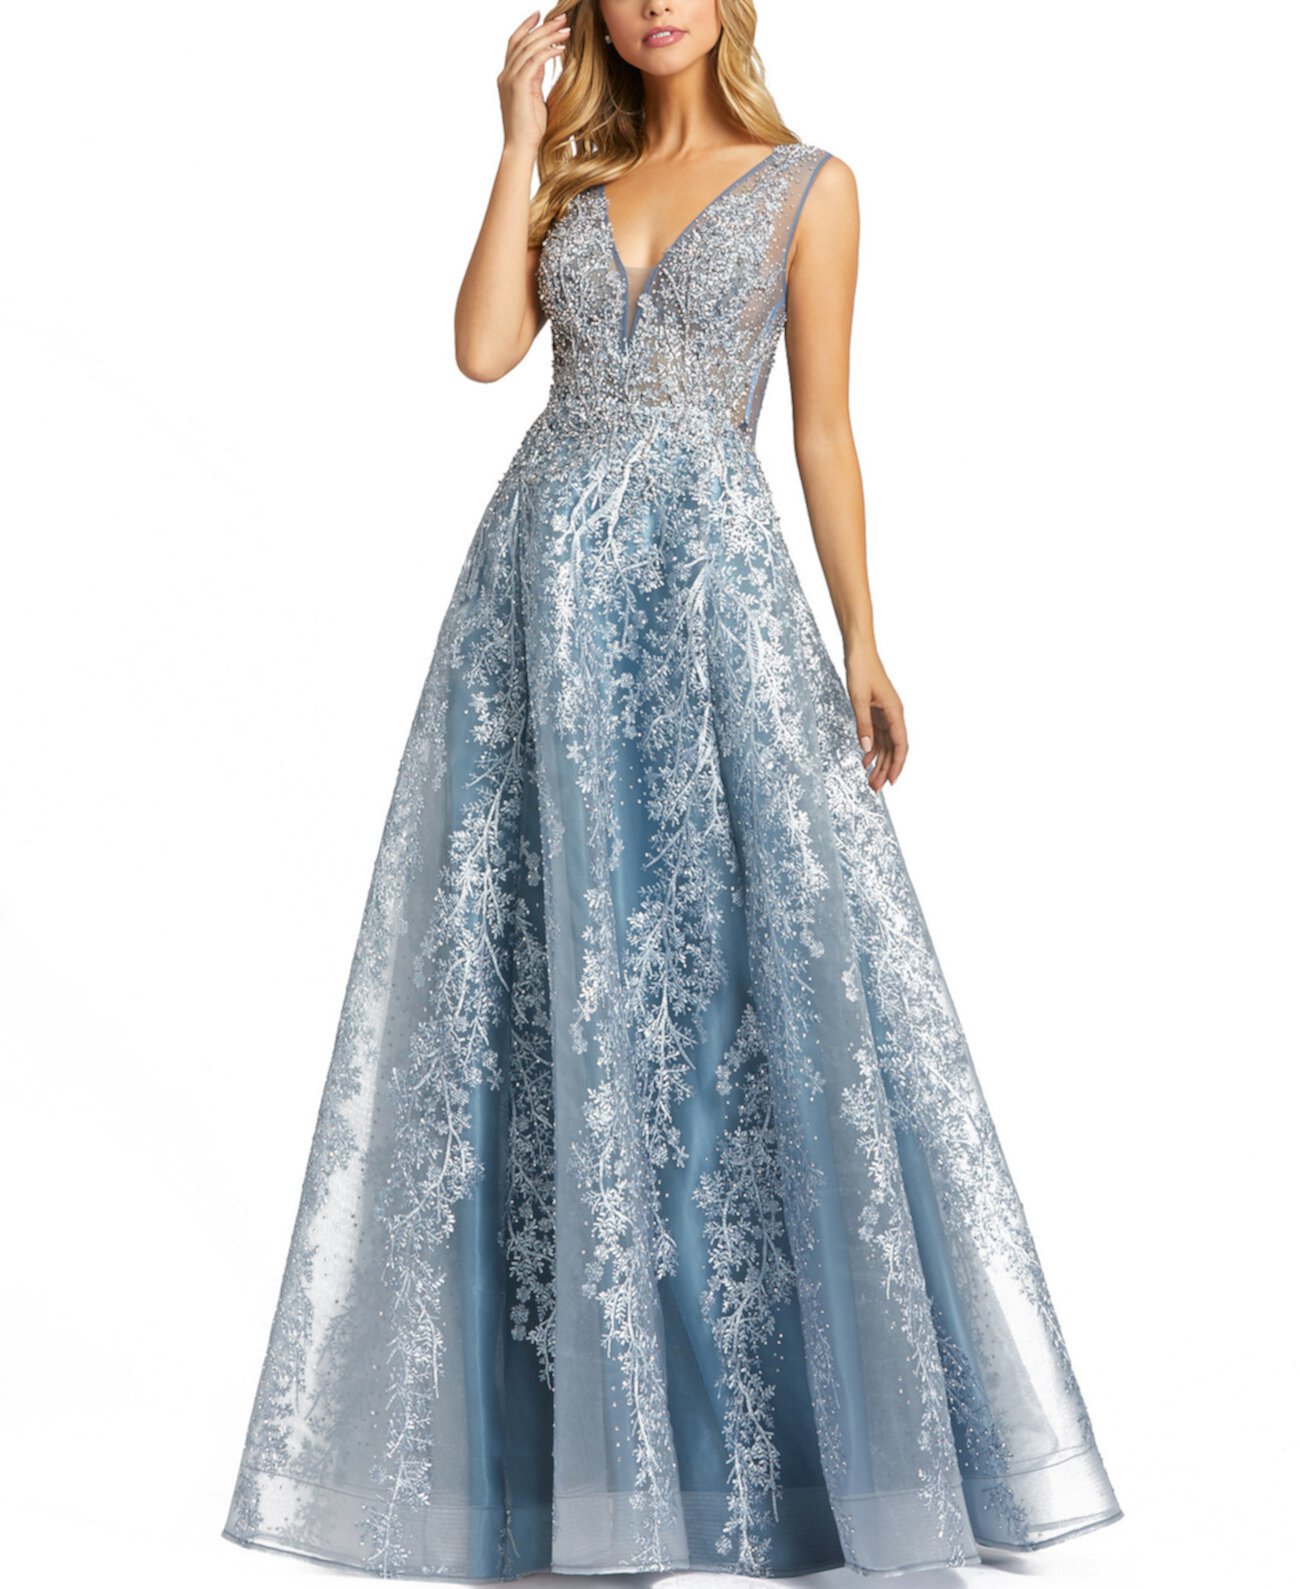 Embellished Embroidered Ball Gown MAC DUGGAL